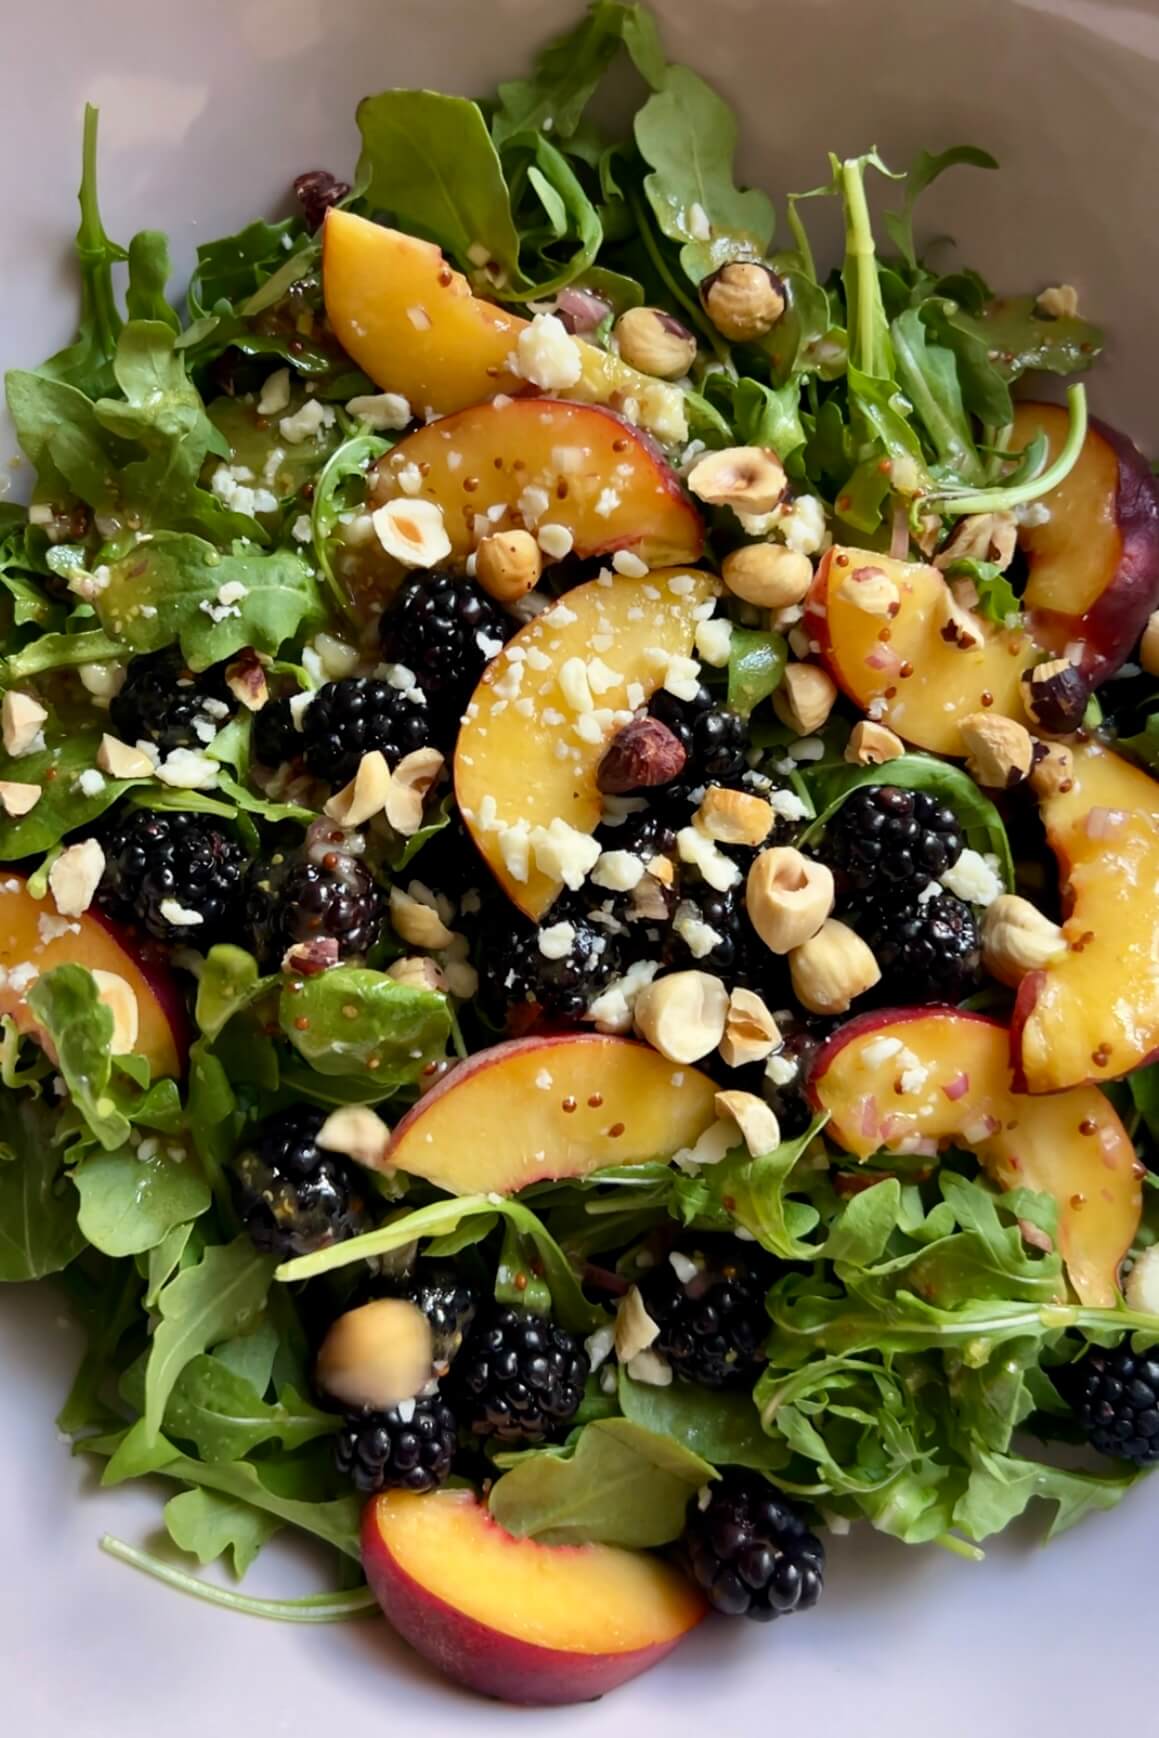 A fresh arugula salad in a white bowl featuring sliced peaches, blackberries, and crumbled cheese, topped with chopped hazelnuts. The colorful ingredients create a visually appealing combination, highlighting the vibrant mix of green, yellow, dark purple, and light brown hues.